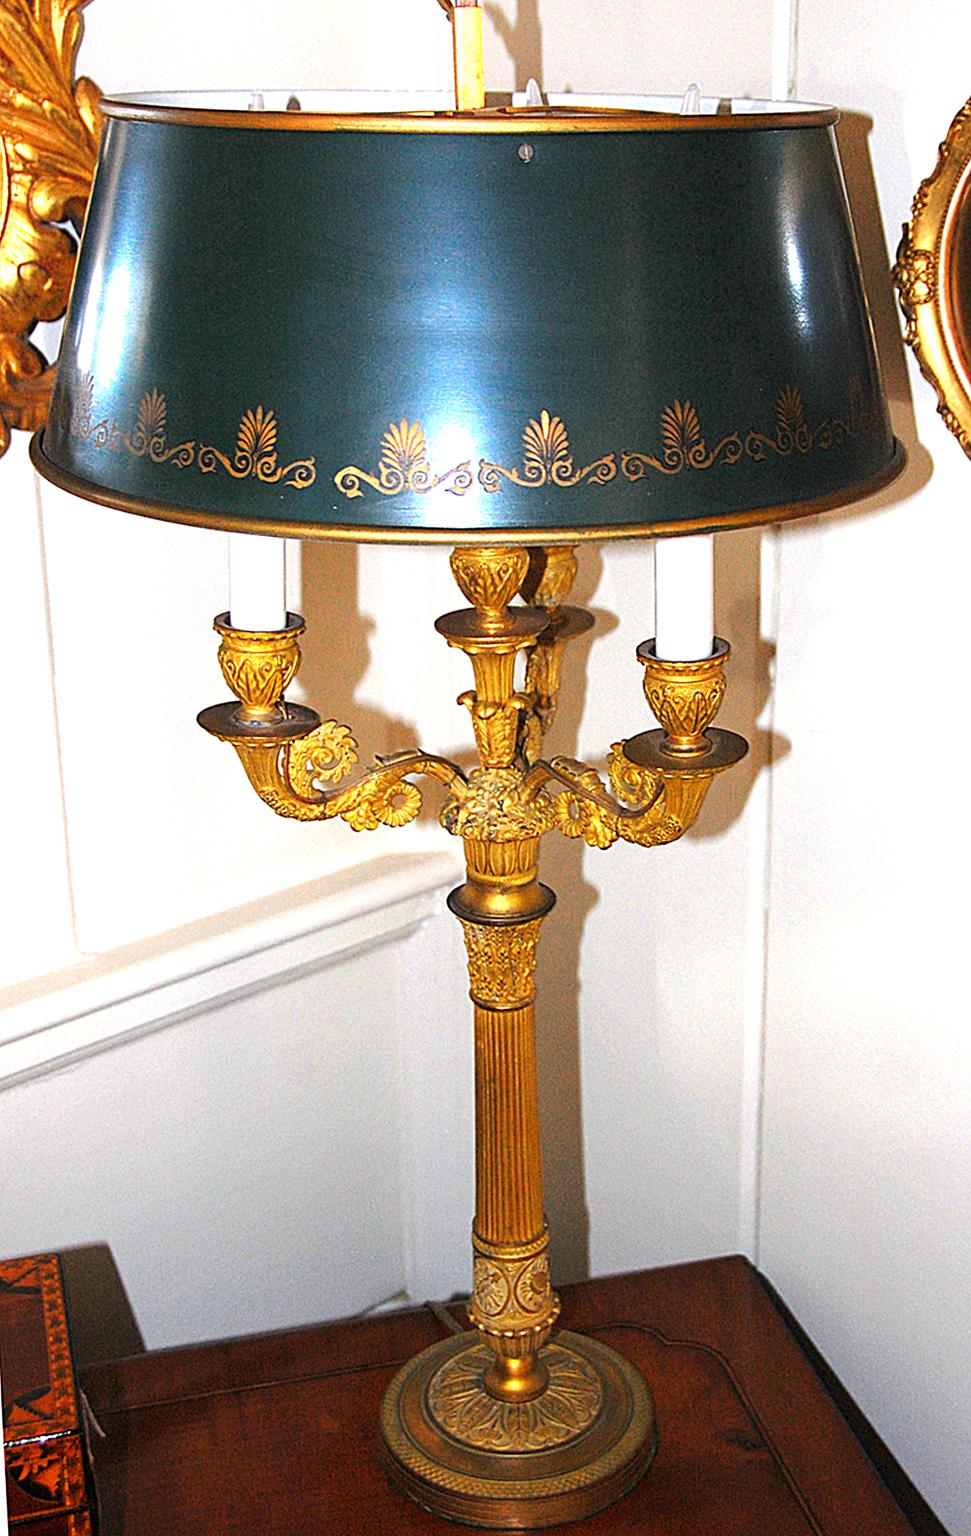 French ormolu three light candelabra with adjustable green tole shade. The Candelabra has been electrified, replacing the candles with flame bulbs. The shade has gold detailing to the lower edge and is adjustable up and down, early to mid-19th